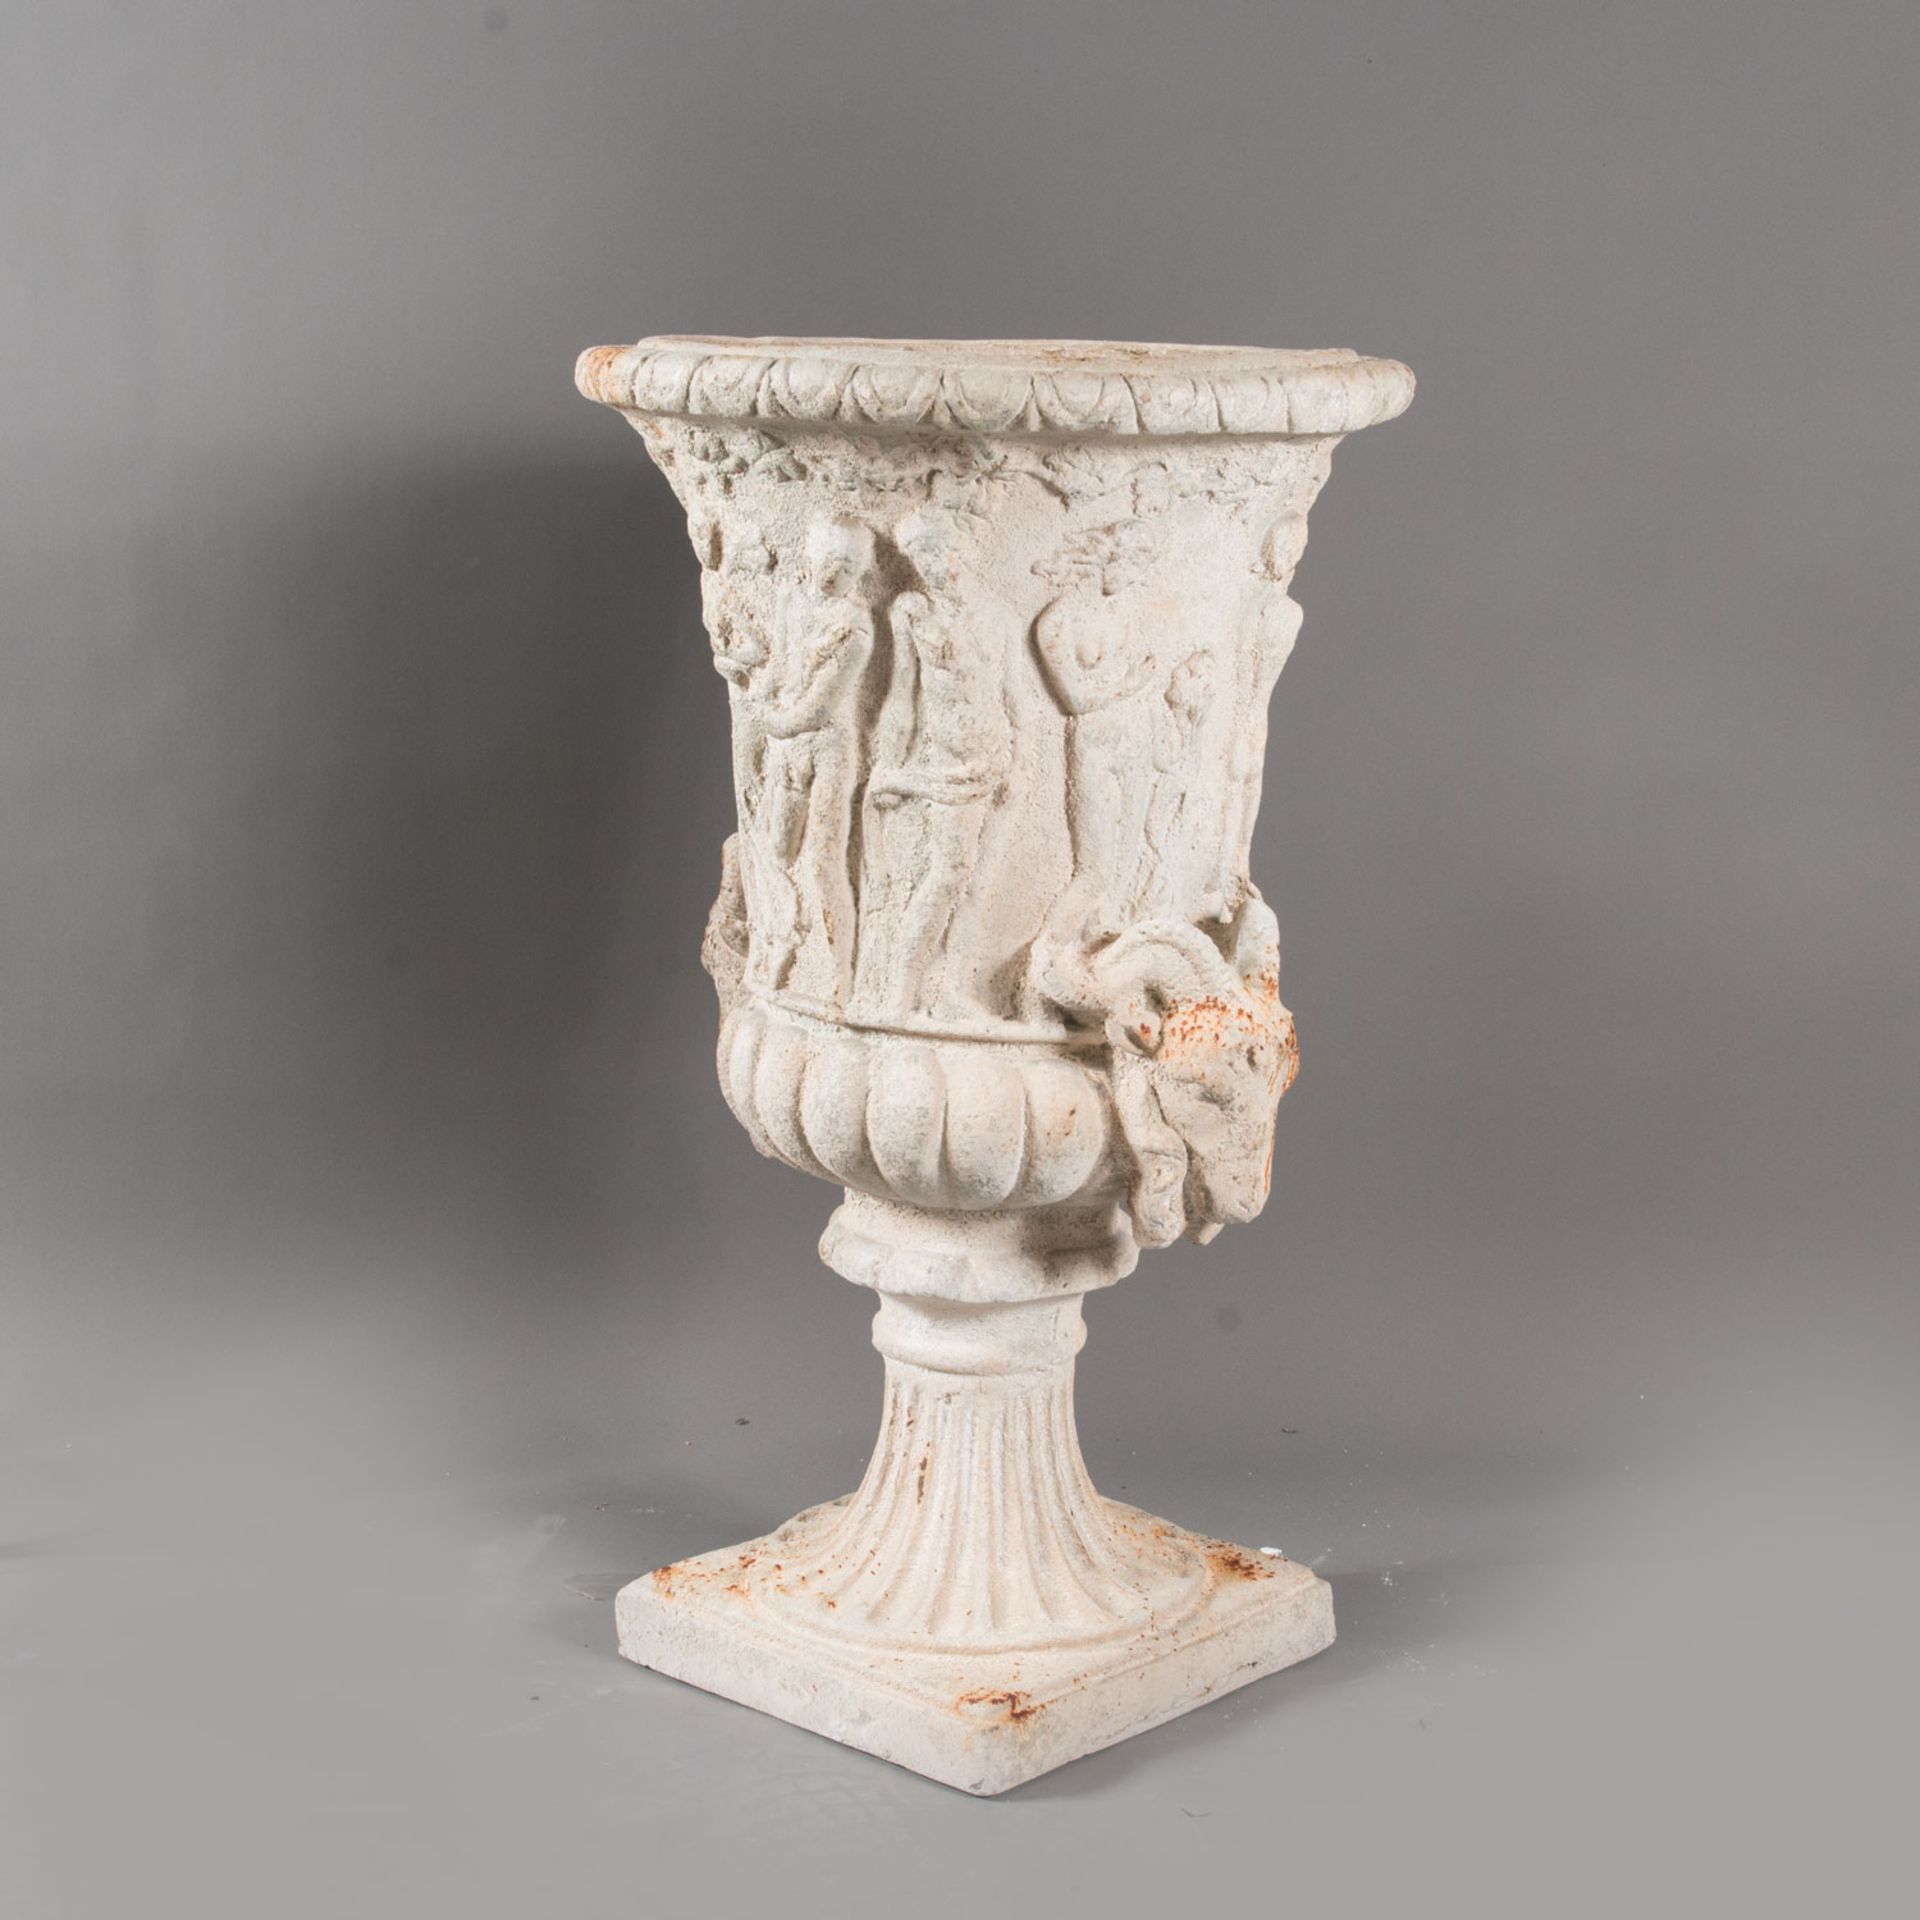 Pair of classical garden urns - Image 3 of 3